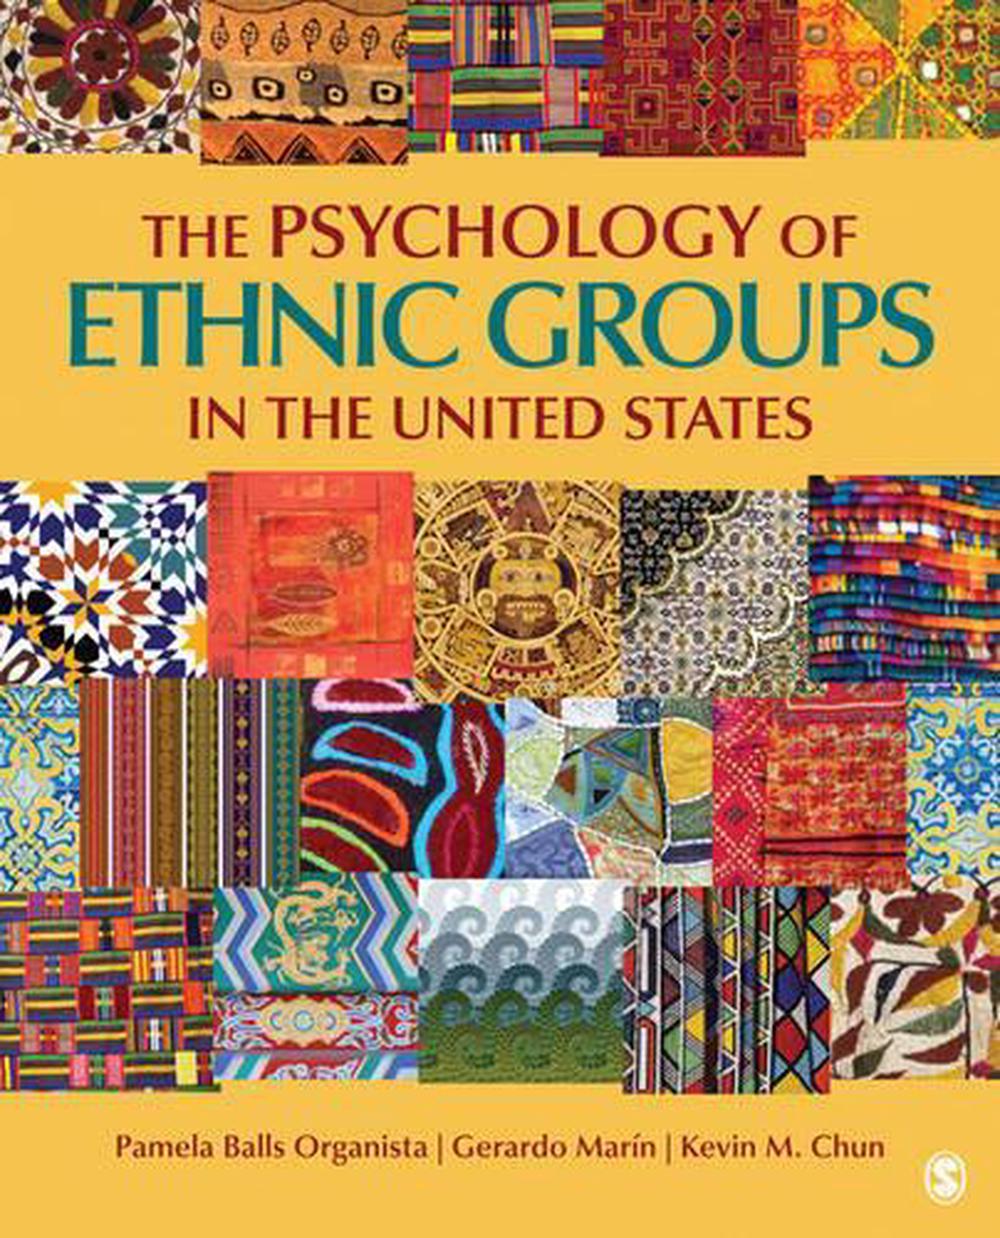 The Psychology of Ethnic Groups in the United States by Pamela Balls